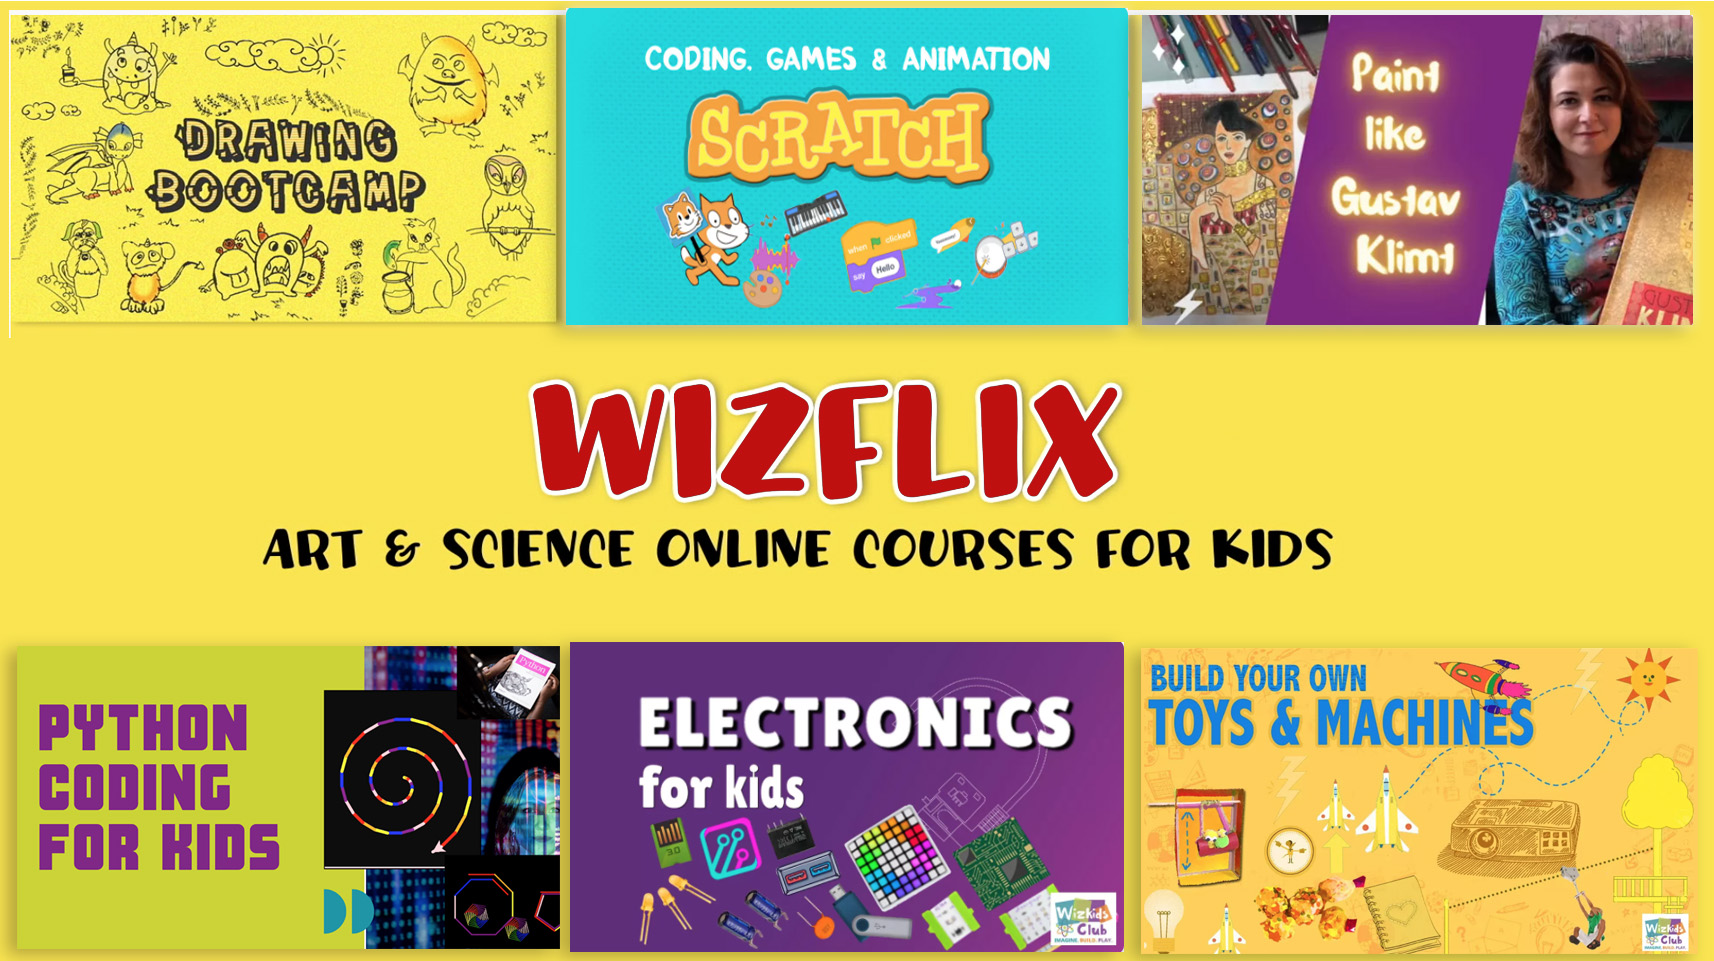 More art and science online courses for kids.